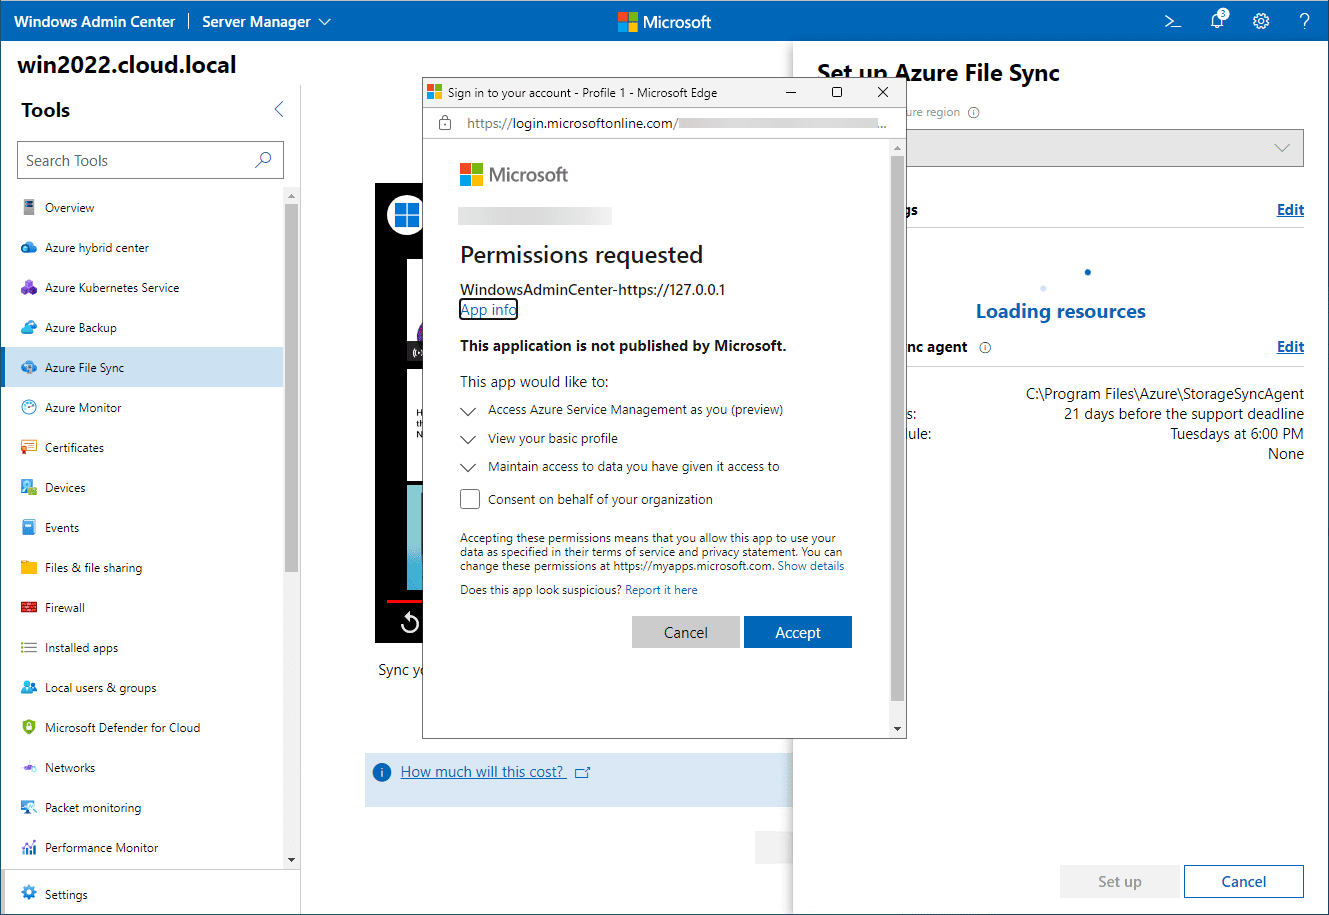 Login with your Azure credentials